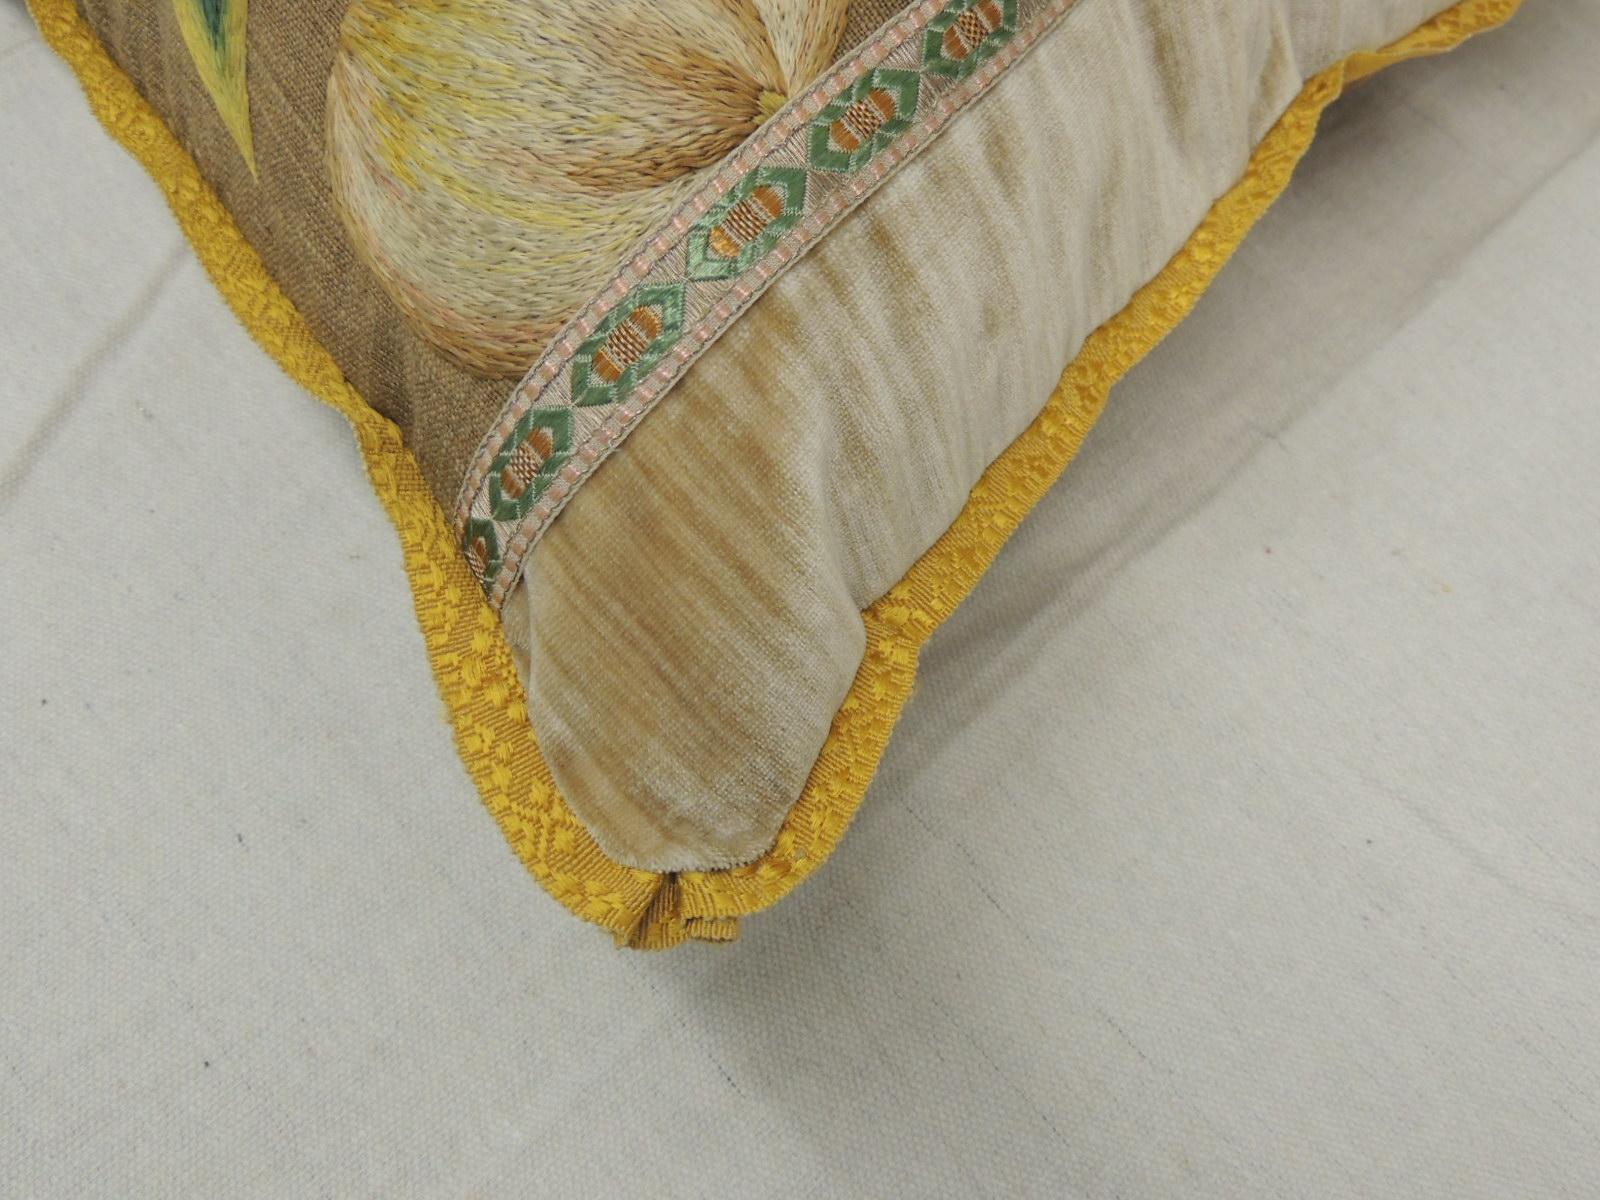 19th Century Antique Venetian Gold and Green Floral Embroidered Bolster Decorative Pillow